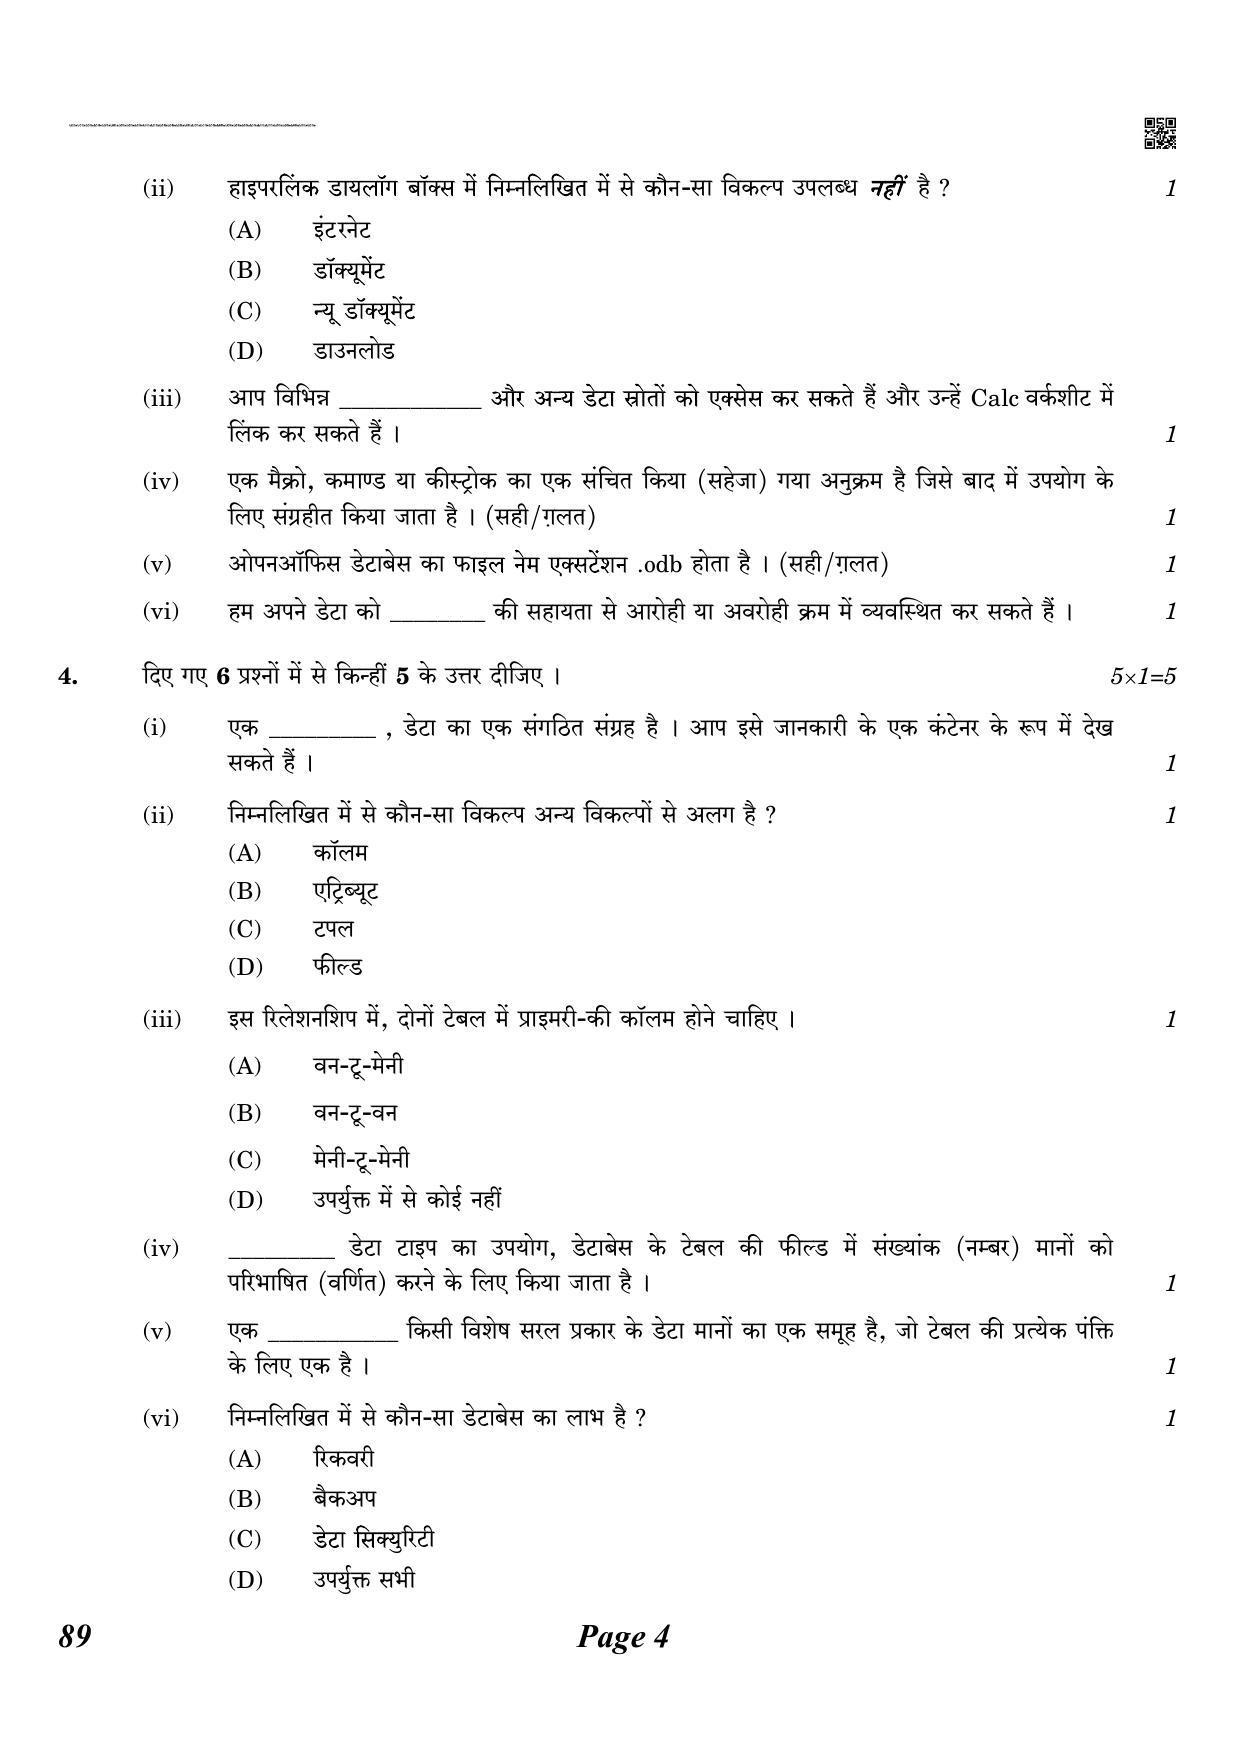 CBSE Class 10 QP_402_INFORMATION_TECH_HINDI 2021 Compartment Question Paper - Page 4